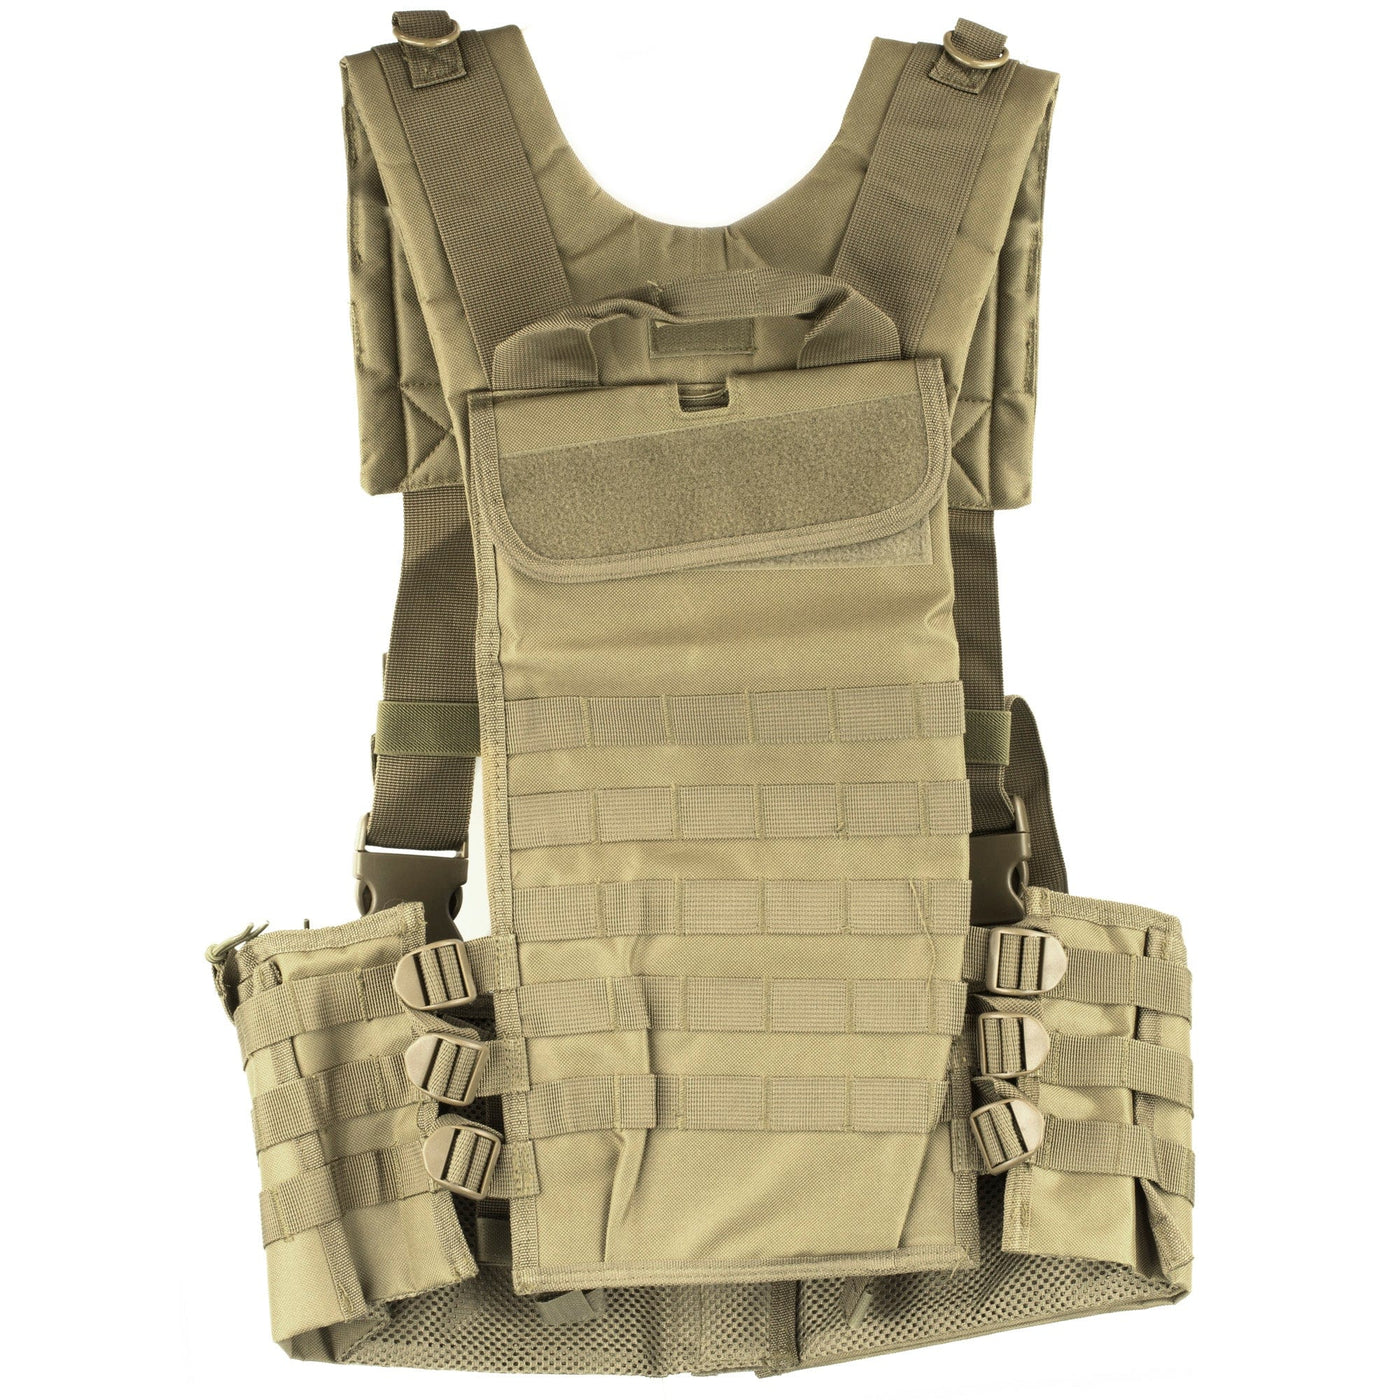 NCSTAR Ncstar Vism Ar Chest Rig Tan Holsters